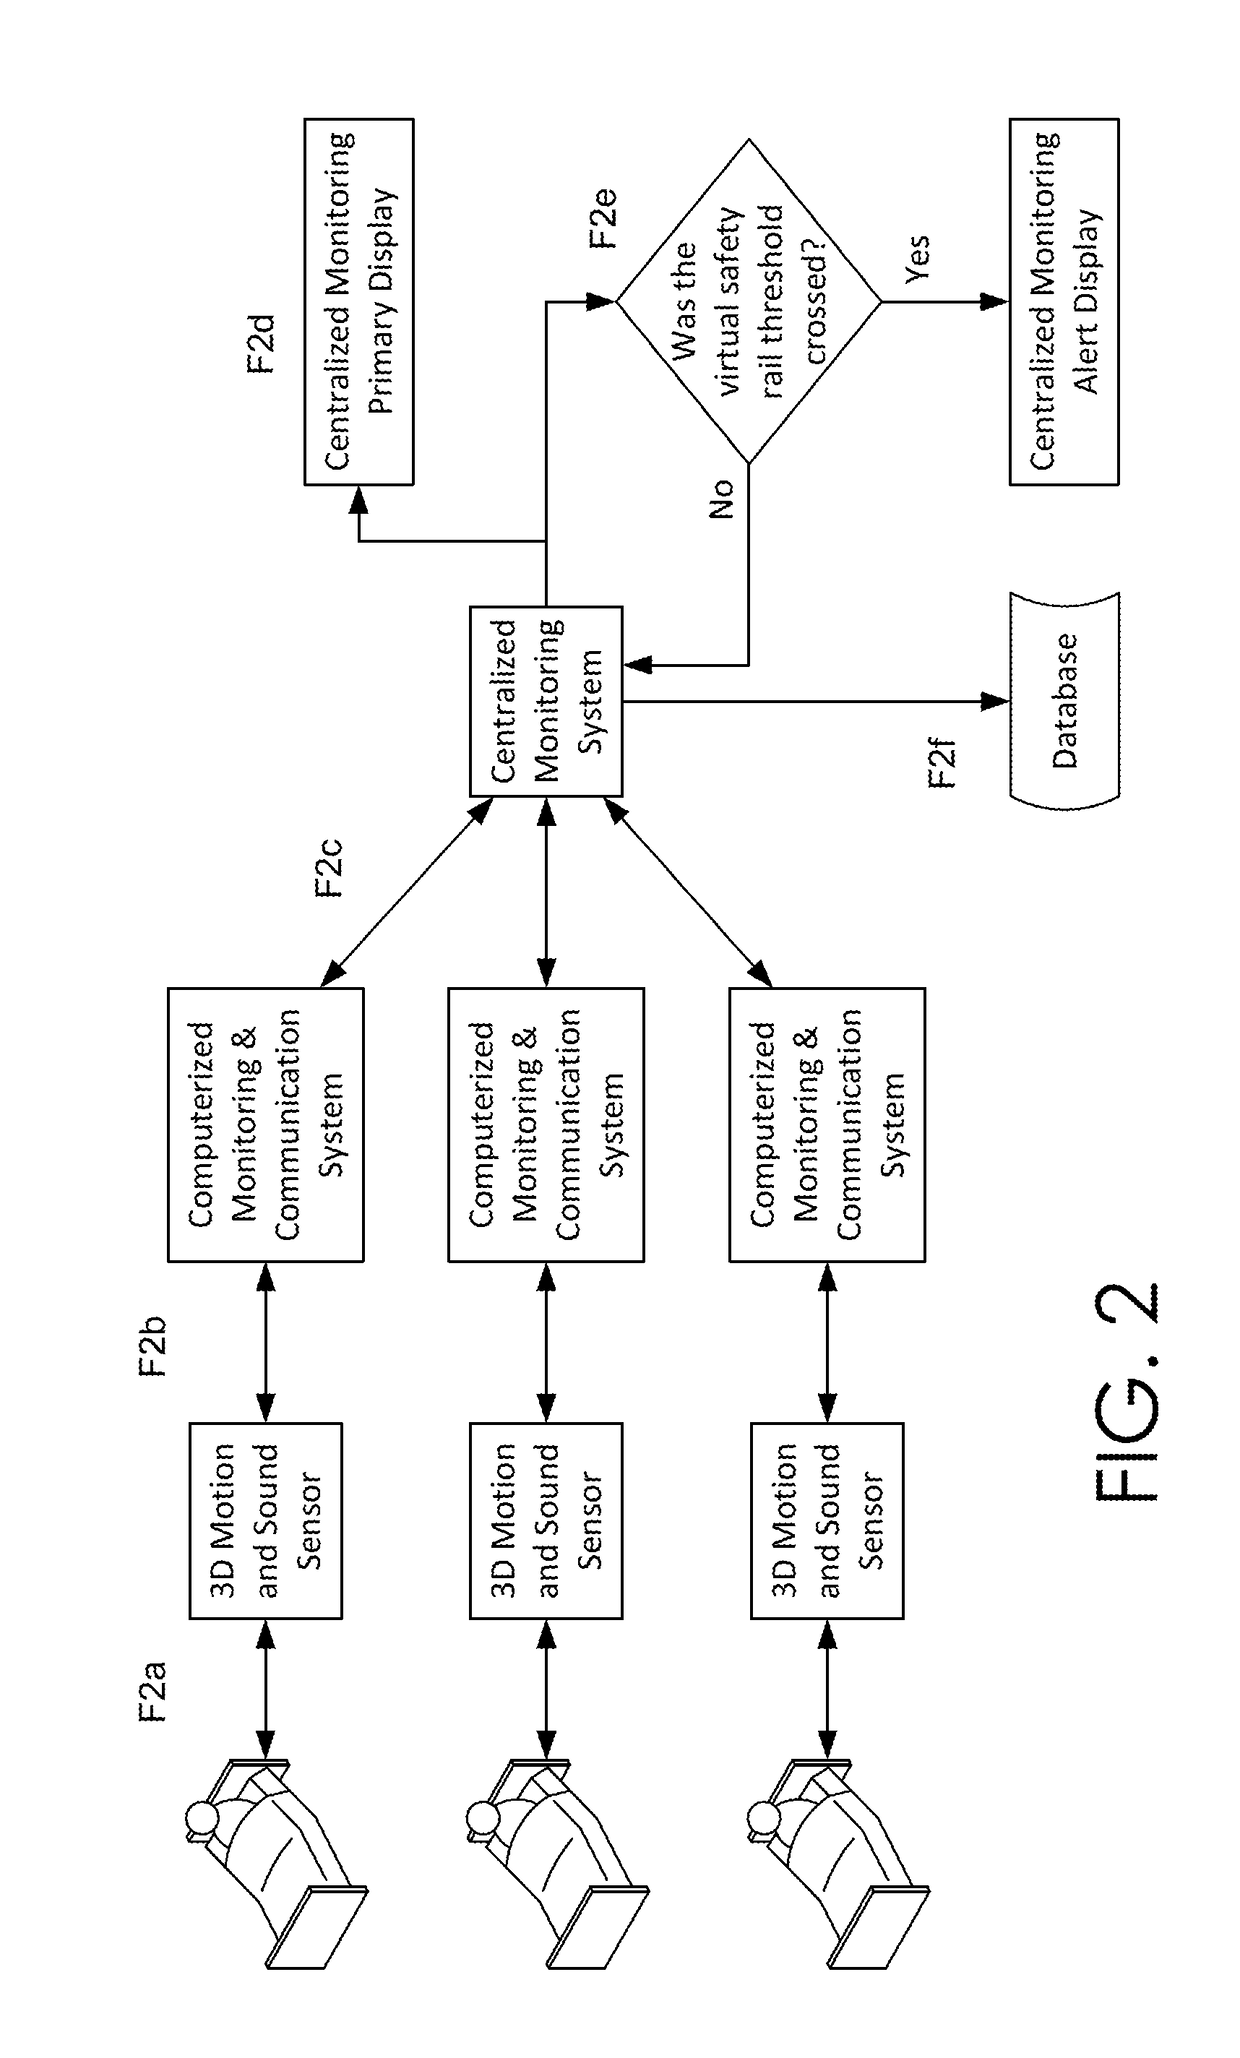 Method for determining whether an individual leaves a prescribed virtual perimeter